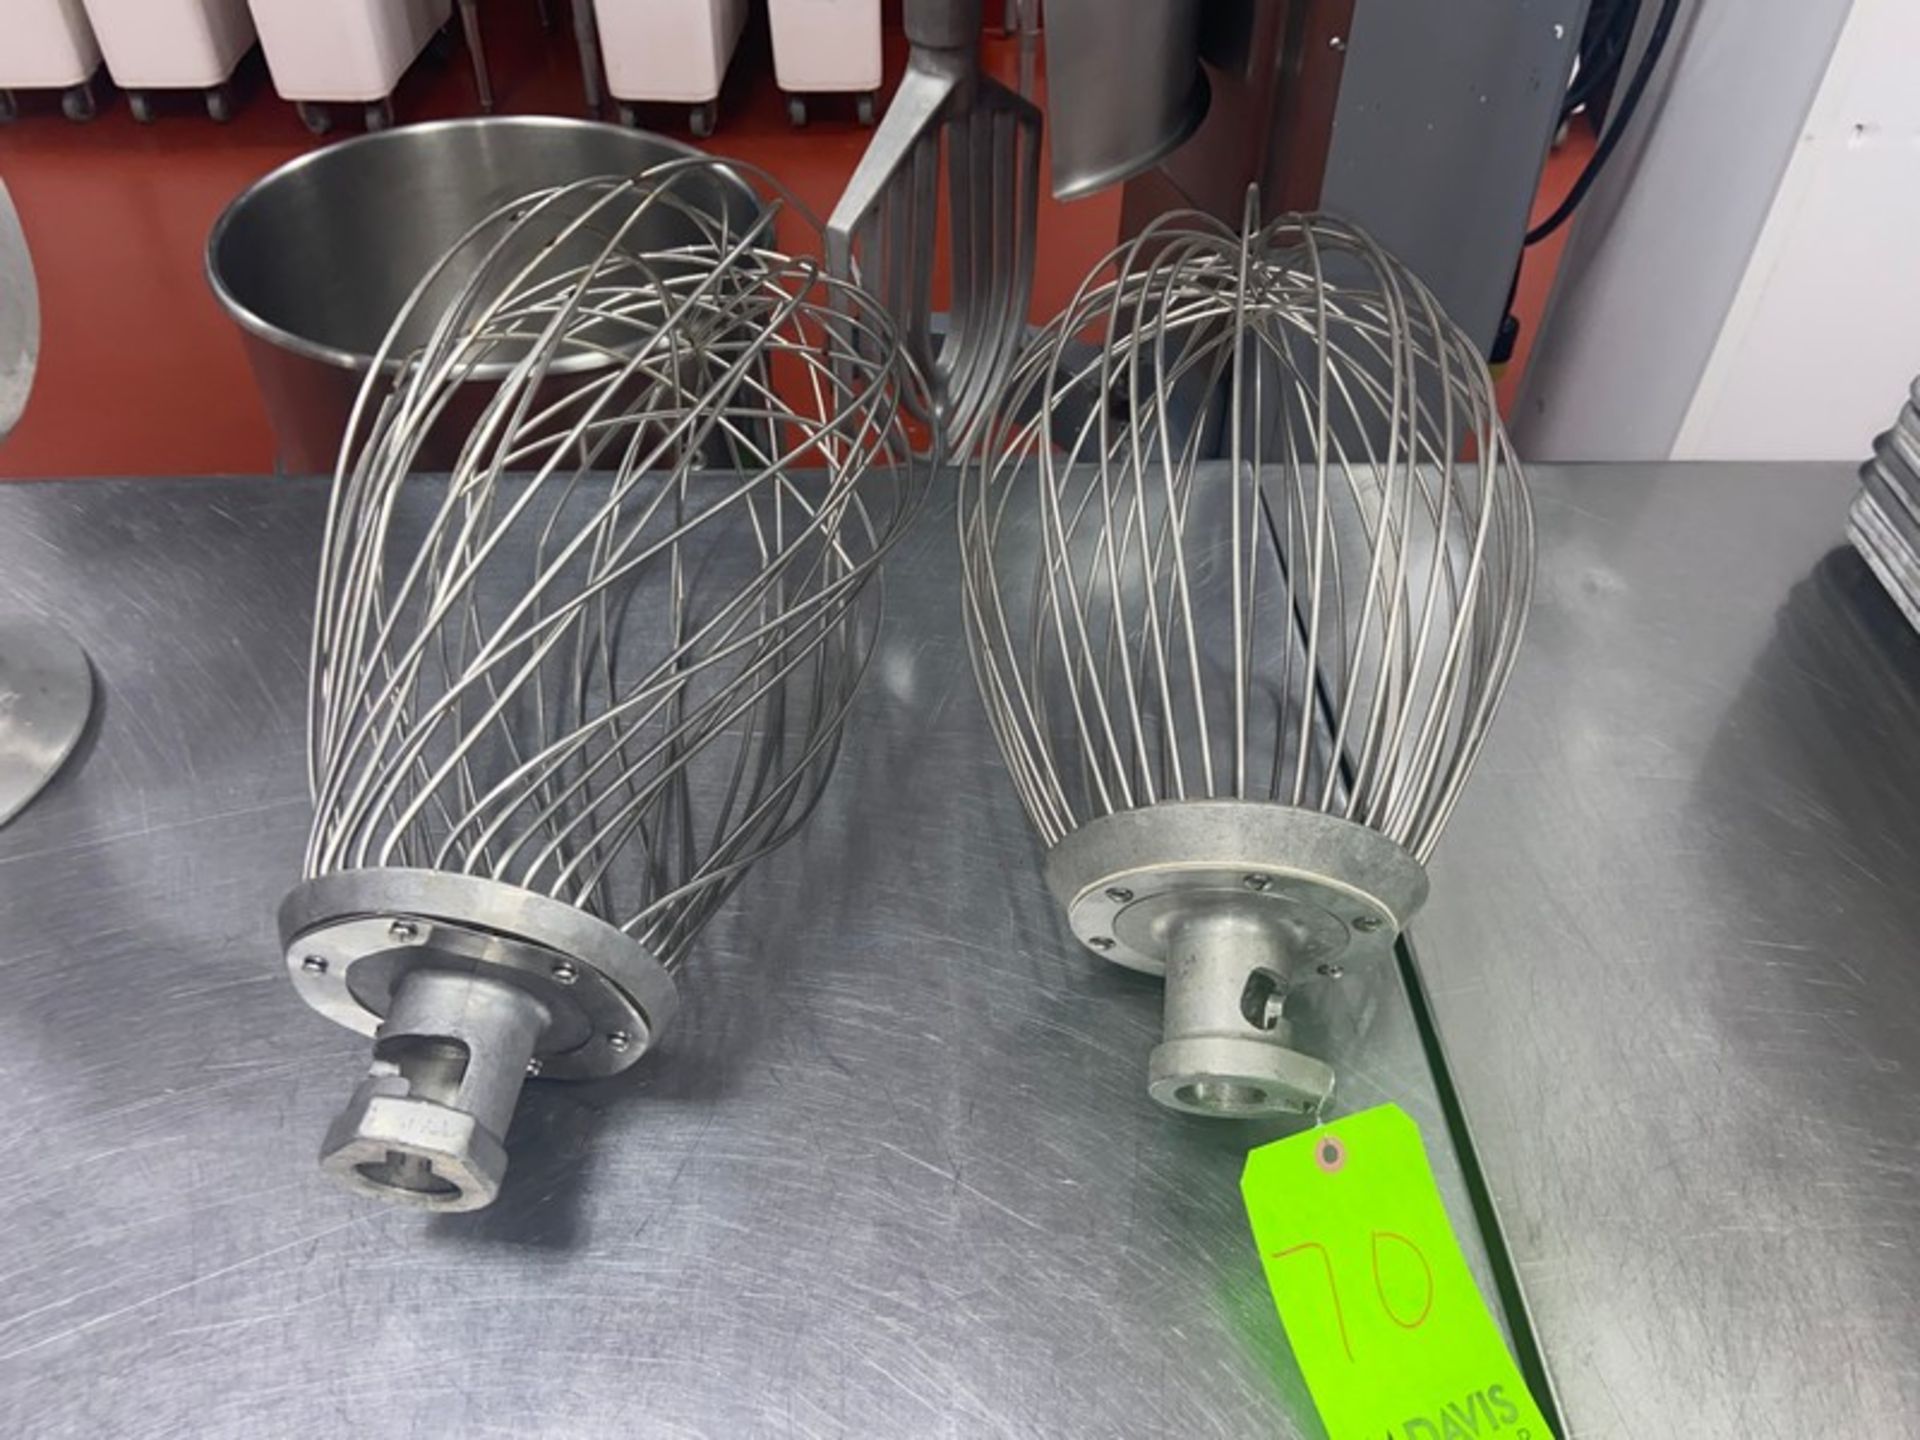 (4) Hobart Mixer Attachments, Includes 1-Flat Beater Attachment, 1-Dough Hook Attachment, & 2-Whip - Image 3 of 4